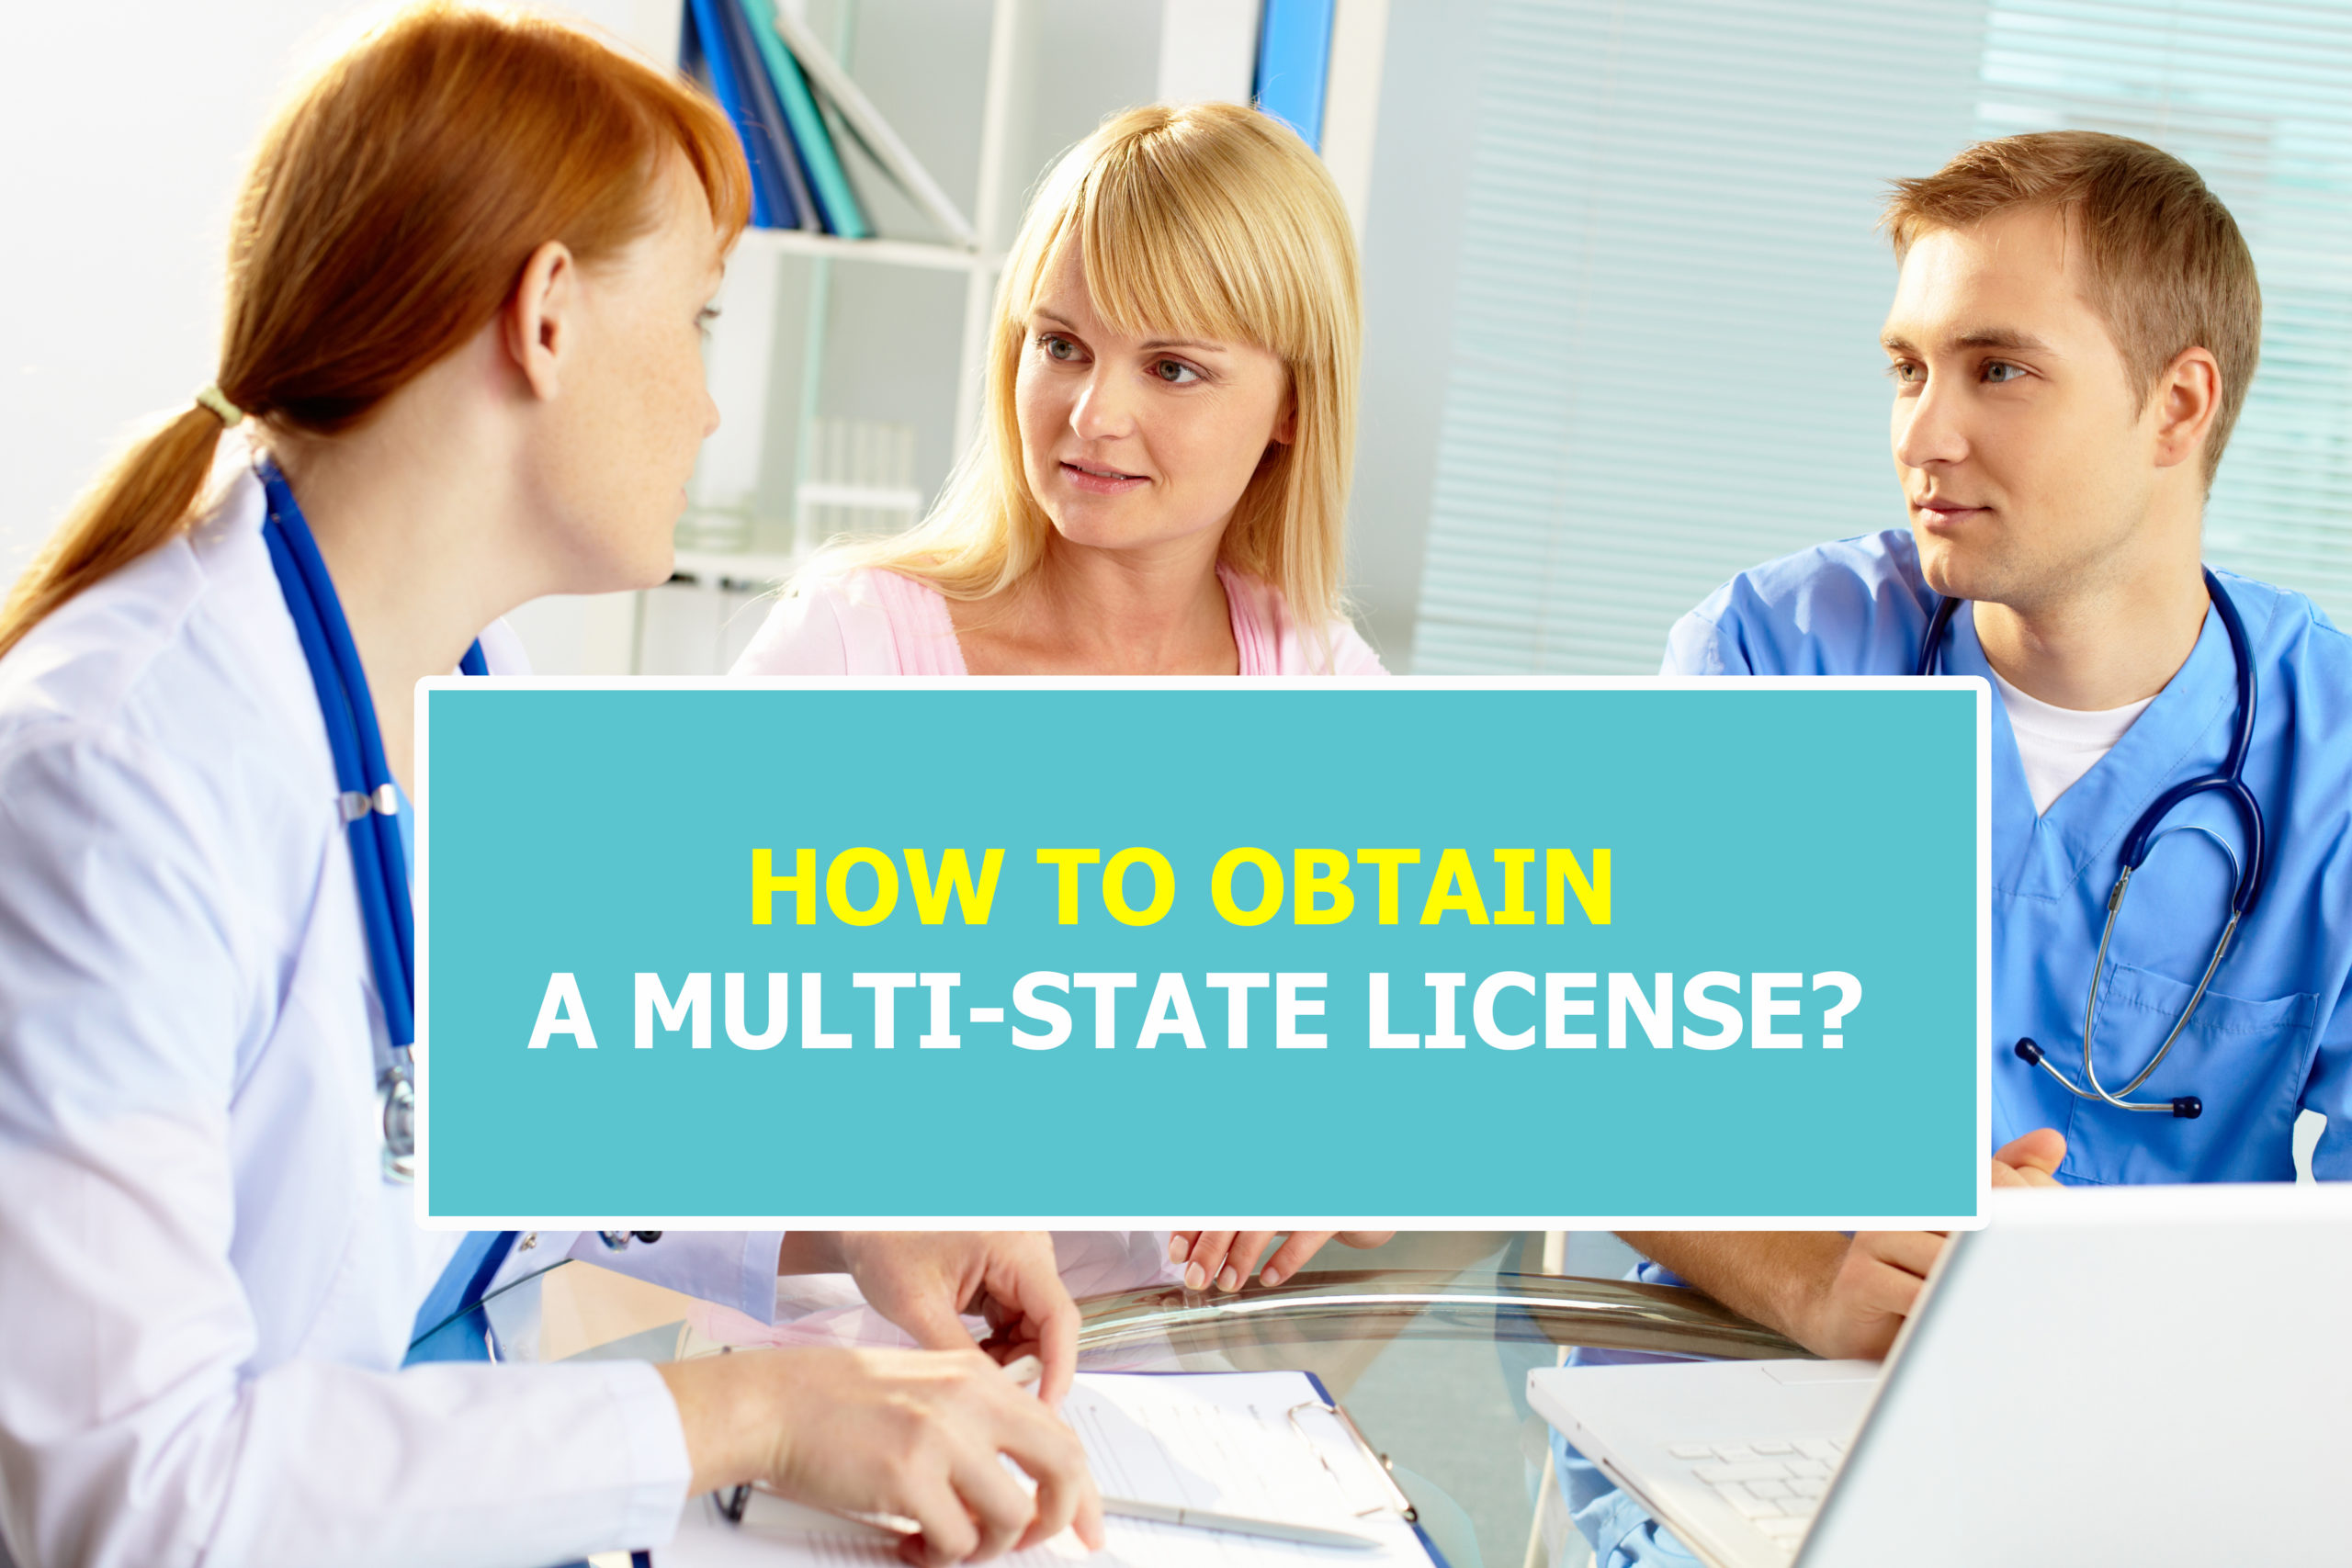 HOW TO OBTAIN A MULTI-STATE LICENSE?